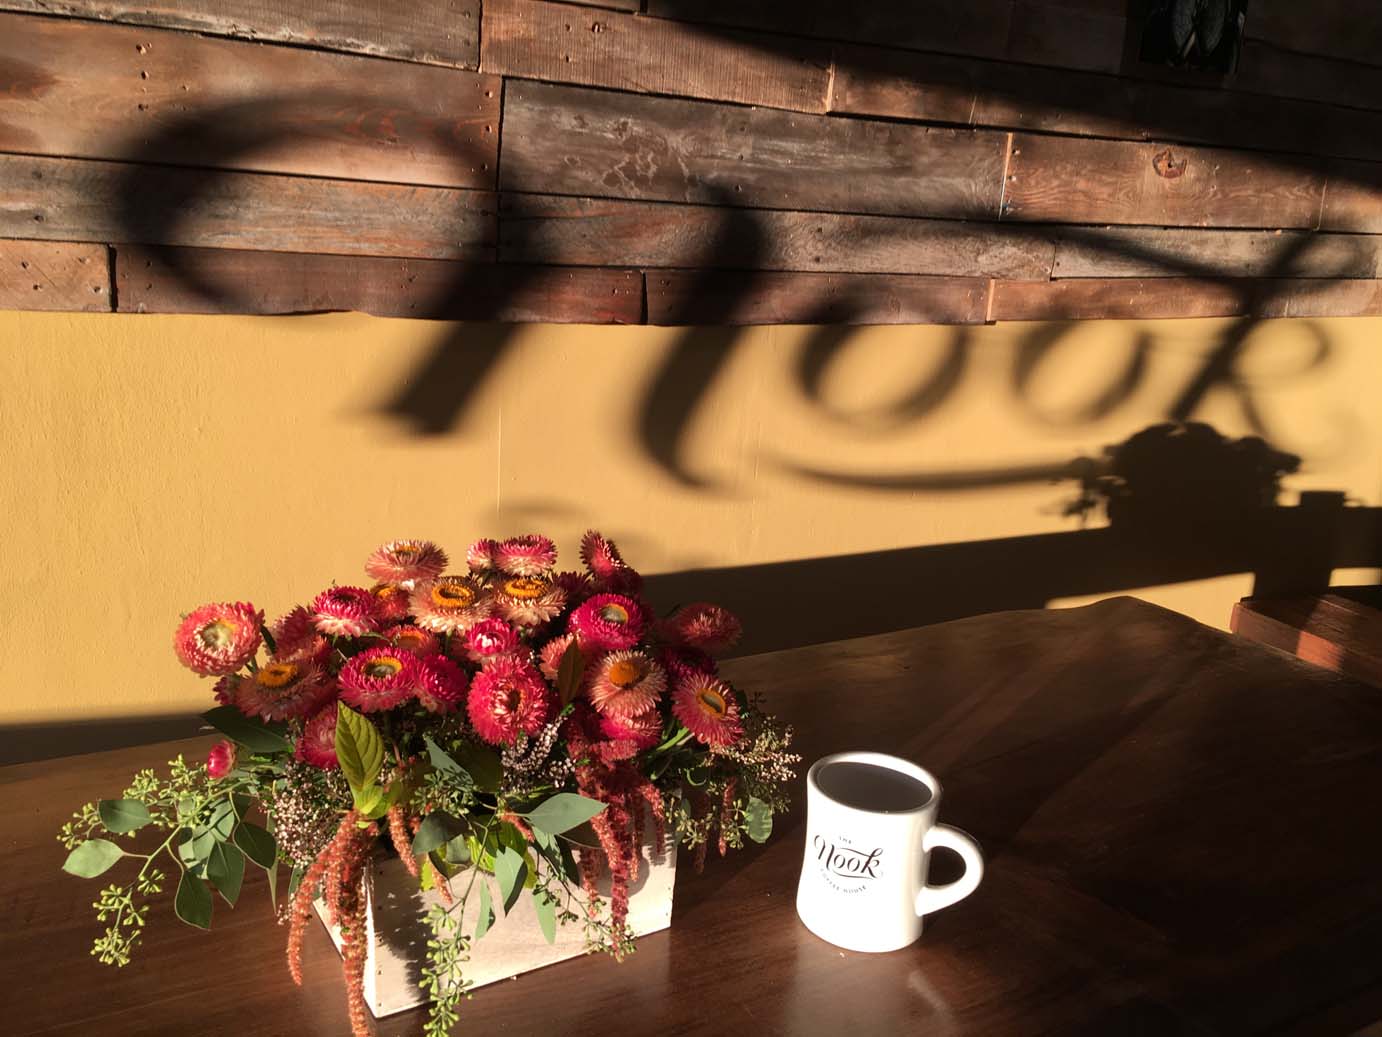 Sun lit flower box and coffee on the table with window shadow  on the wall